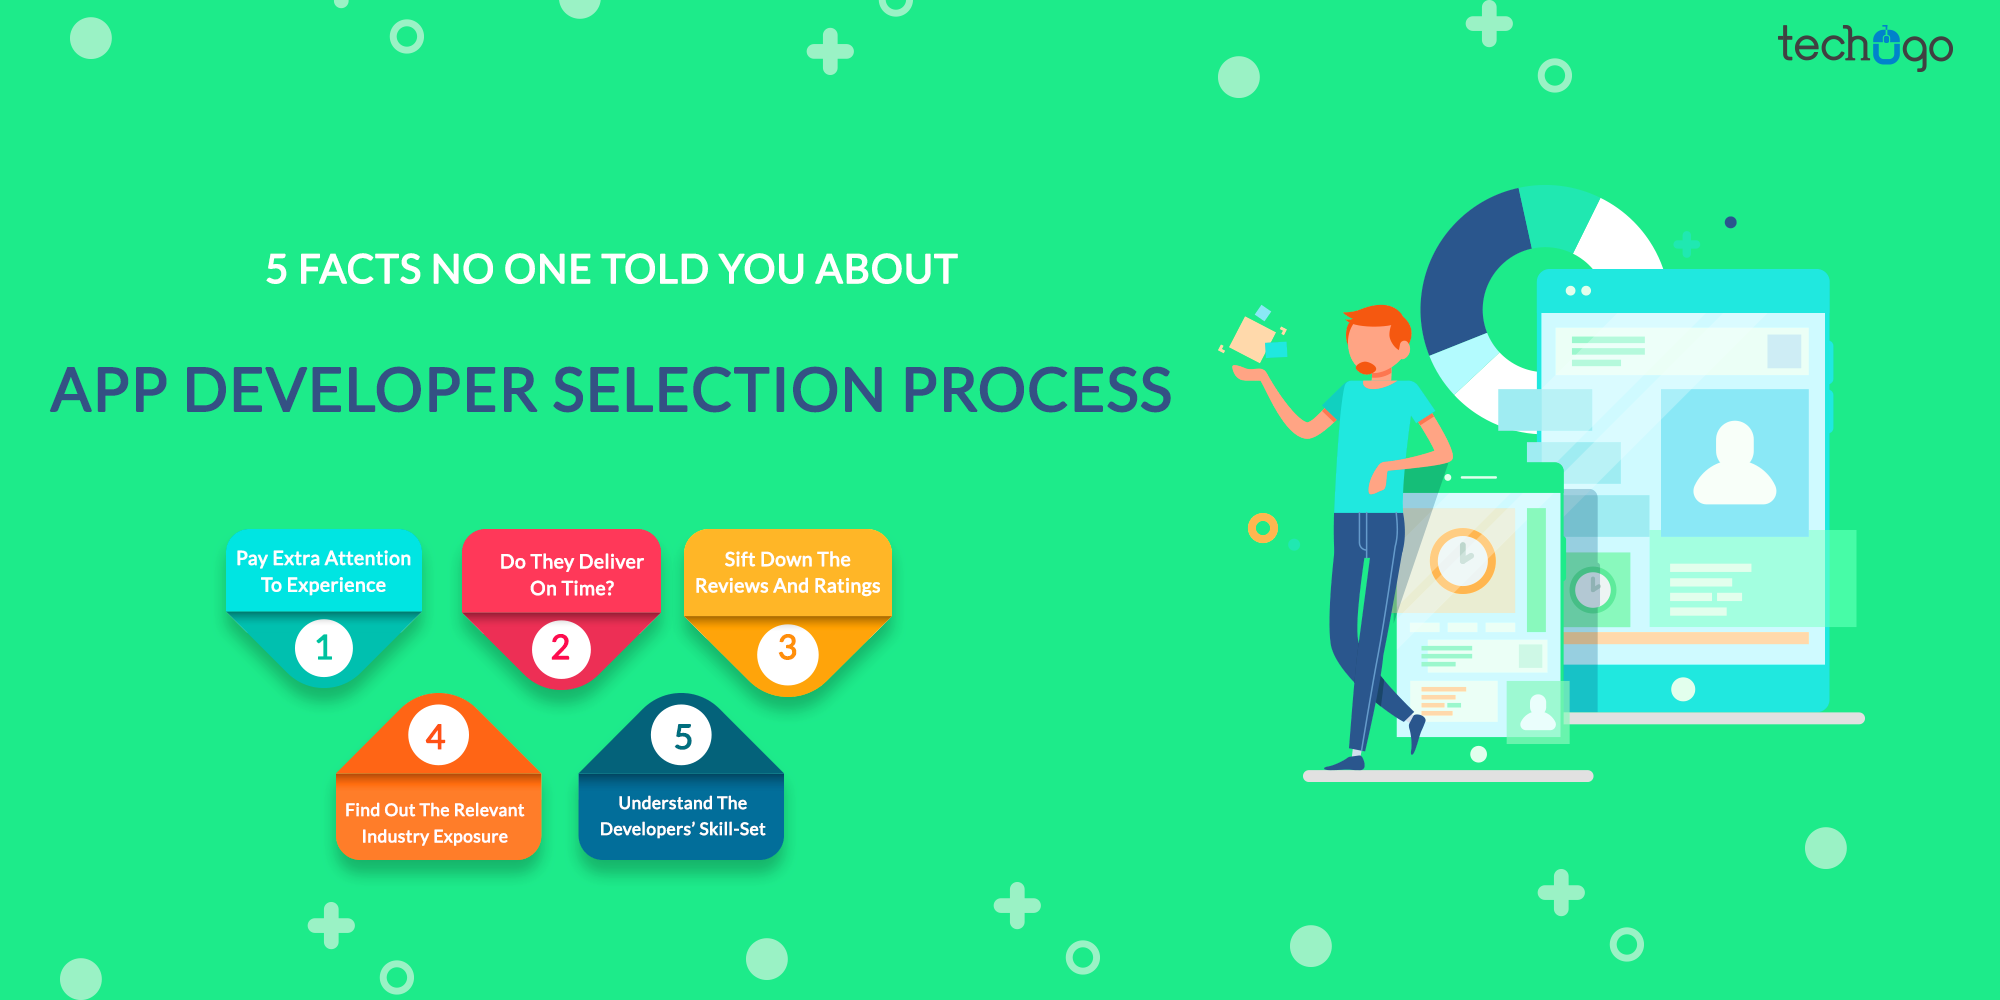 5 Facts No One Told You About App Developer Selection Process